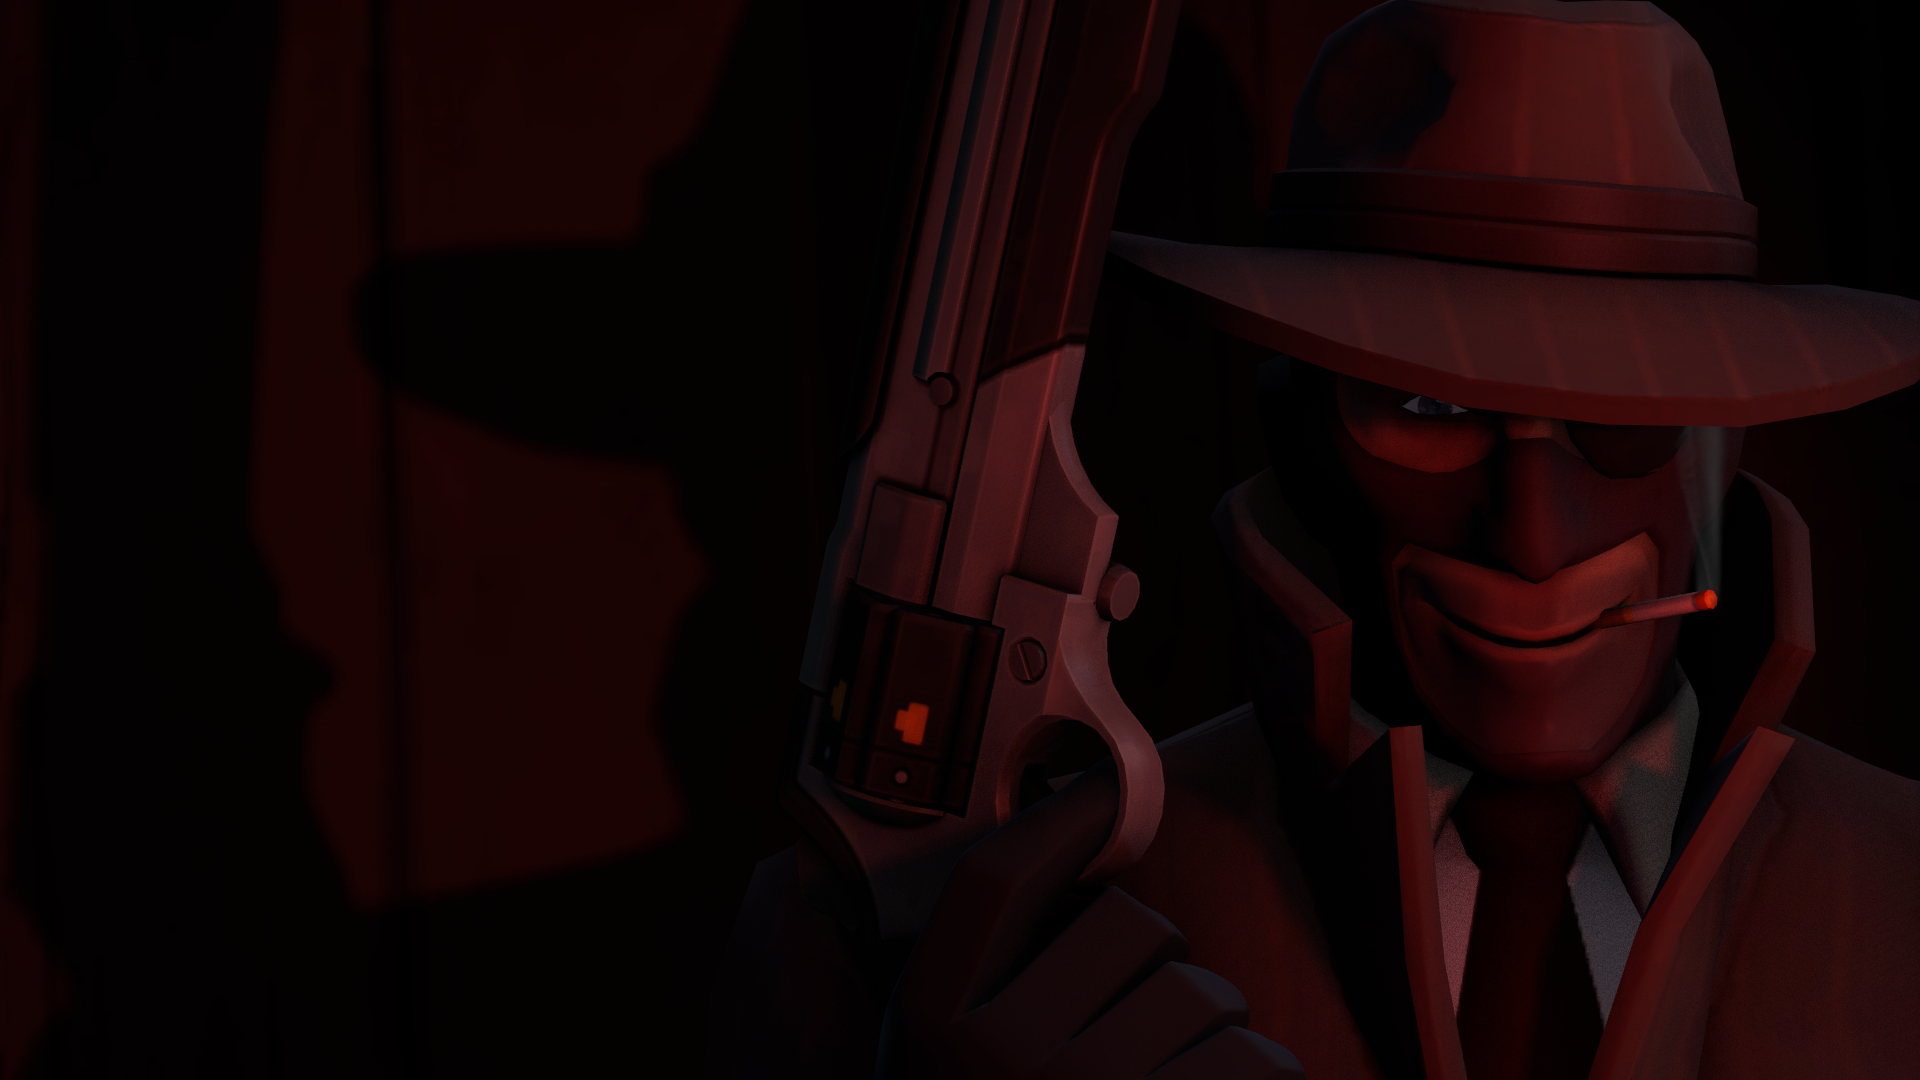 1920x1080 Team Fortress 2 Spy Background (19201080) | Team fortress, Team fortress 2, Fortress 2